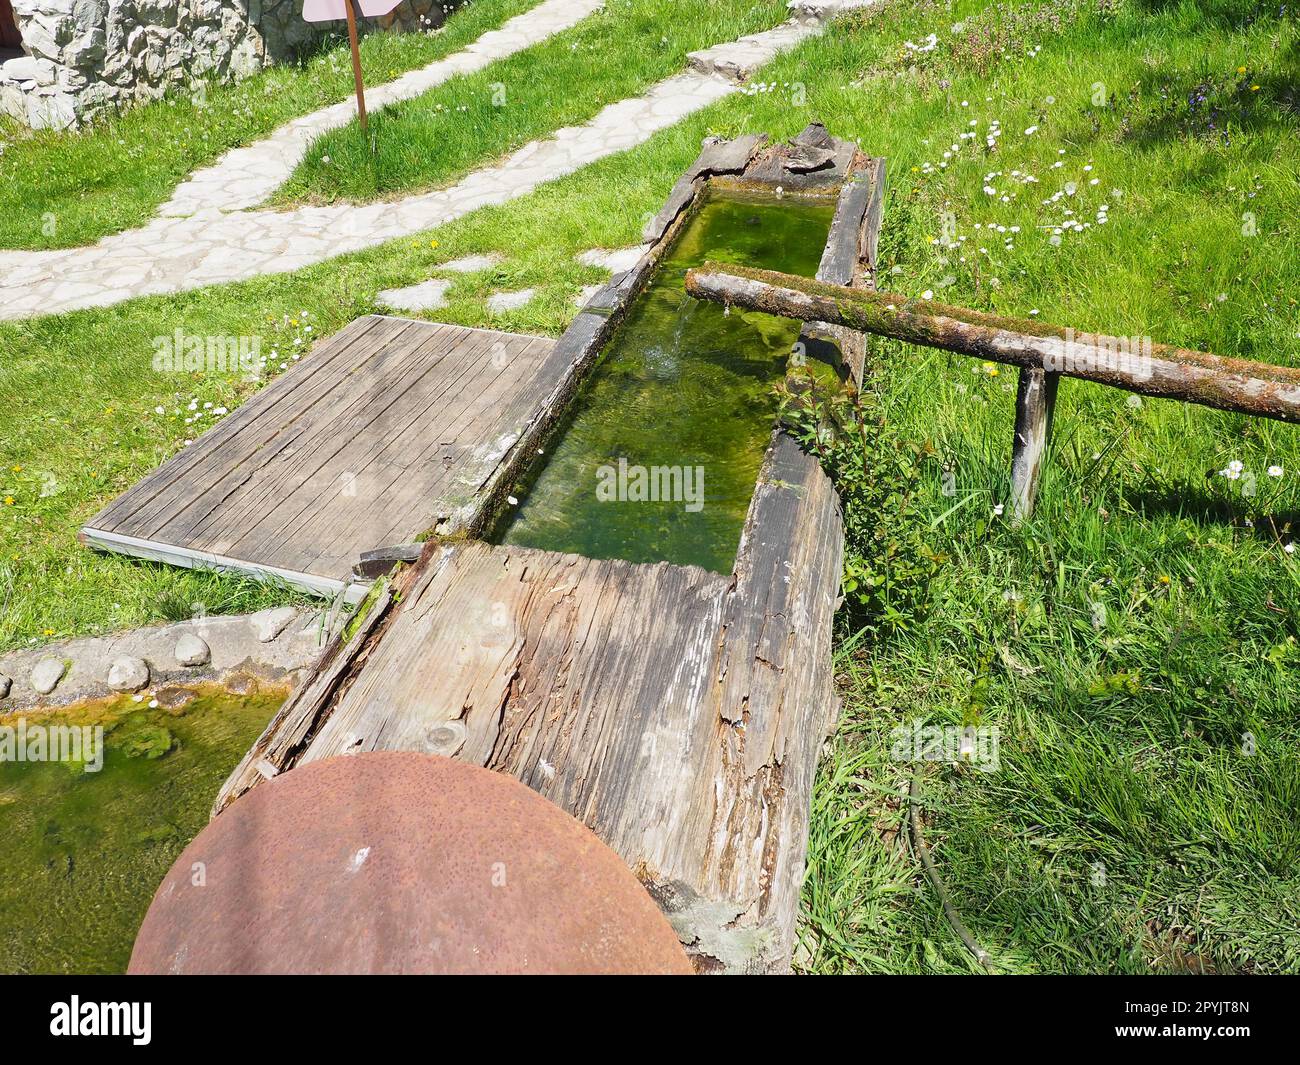 Wooden water trough or livestock drinker. A hewn or hollowed-out log used in rural life. Hollow wooden gutter for water supply. Metal cover of the well and wooden walkways. Green grass on the lawn Stock Photo